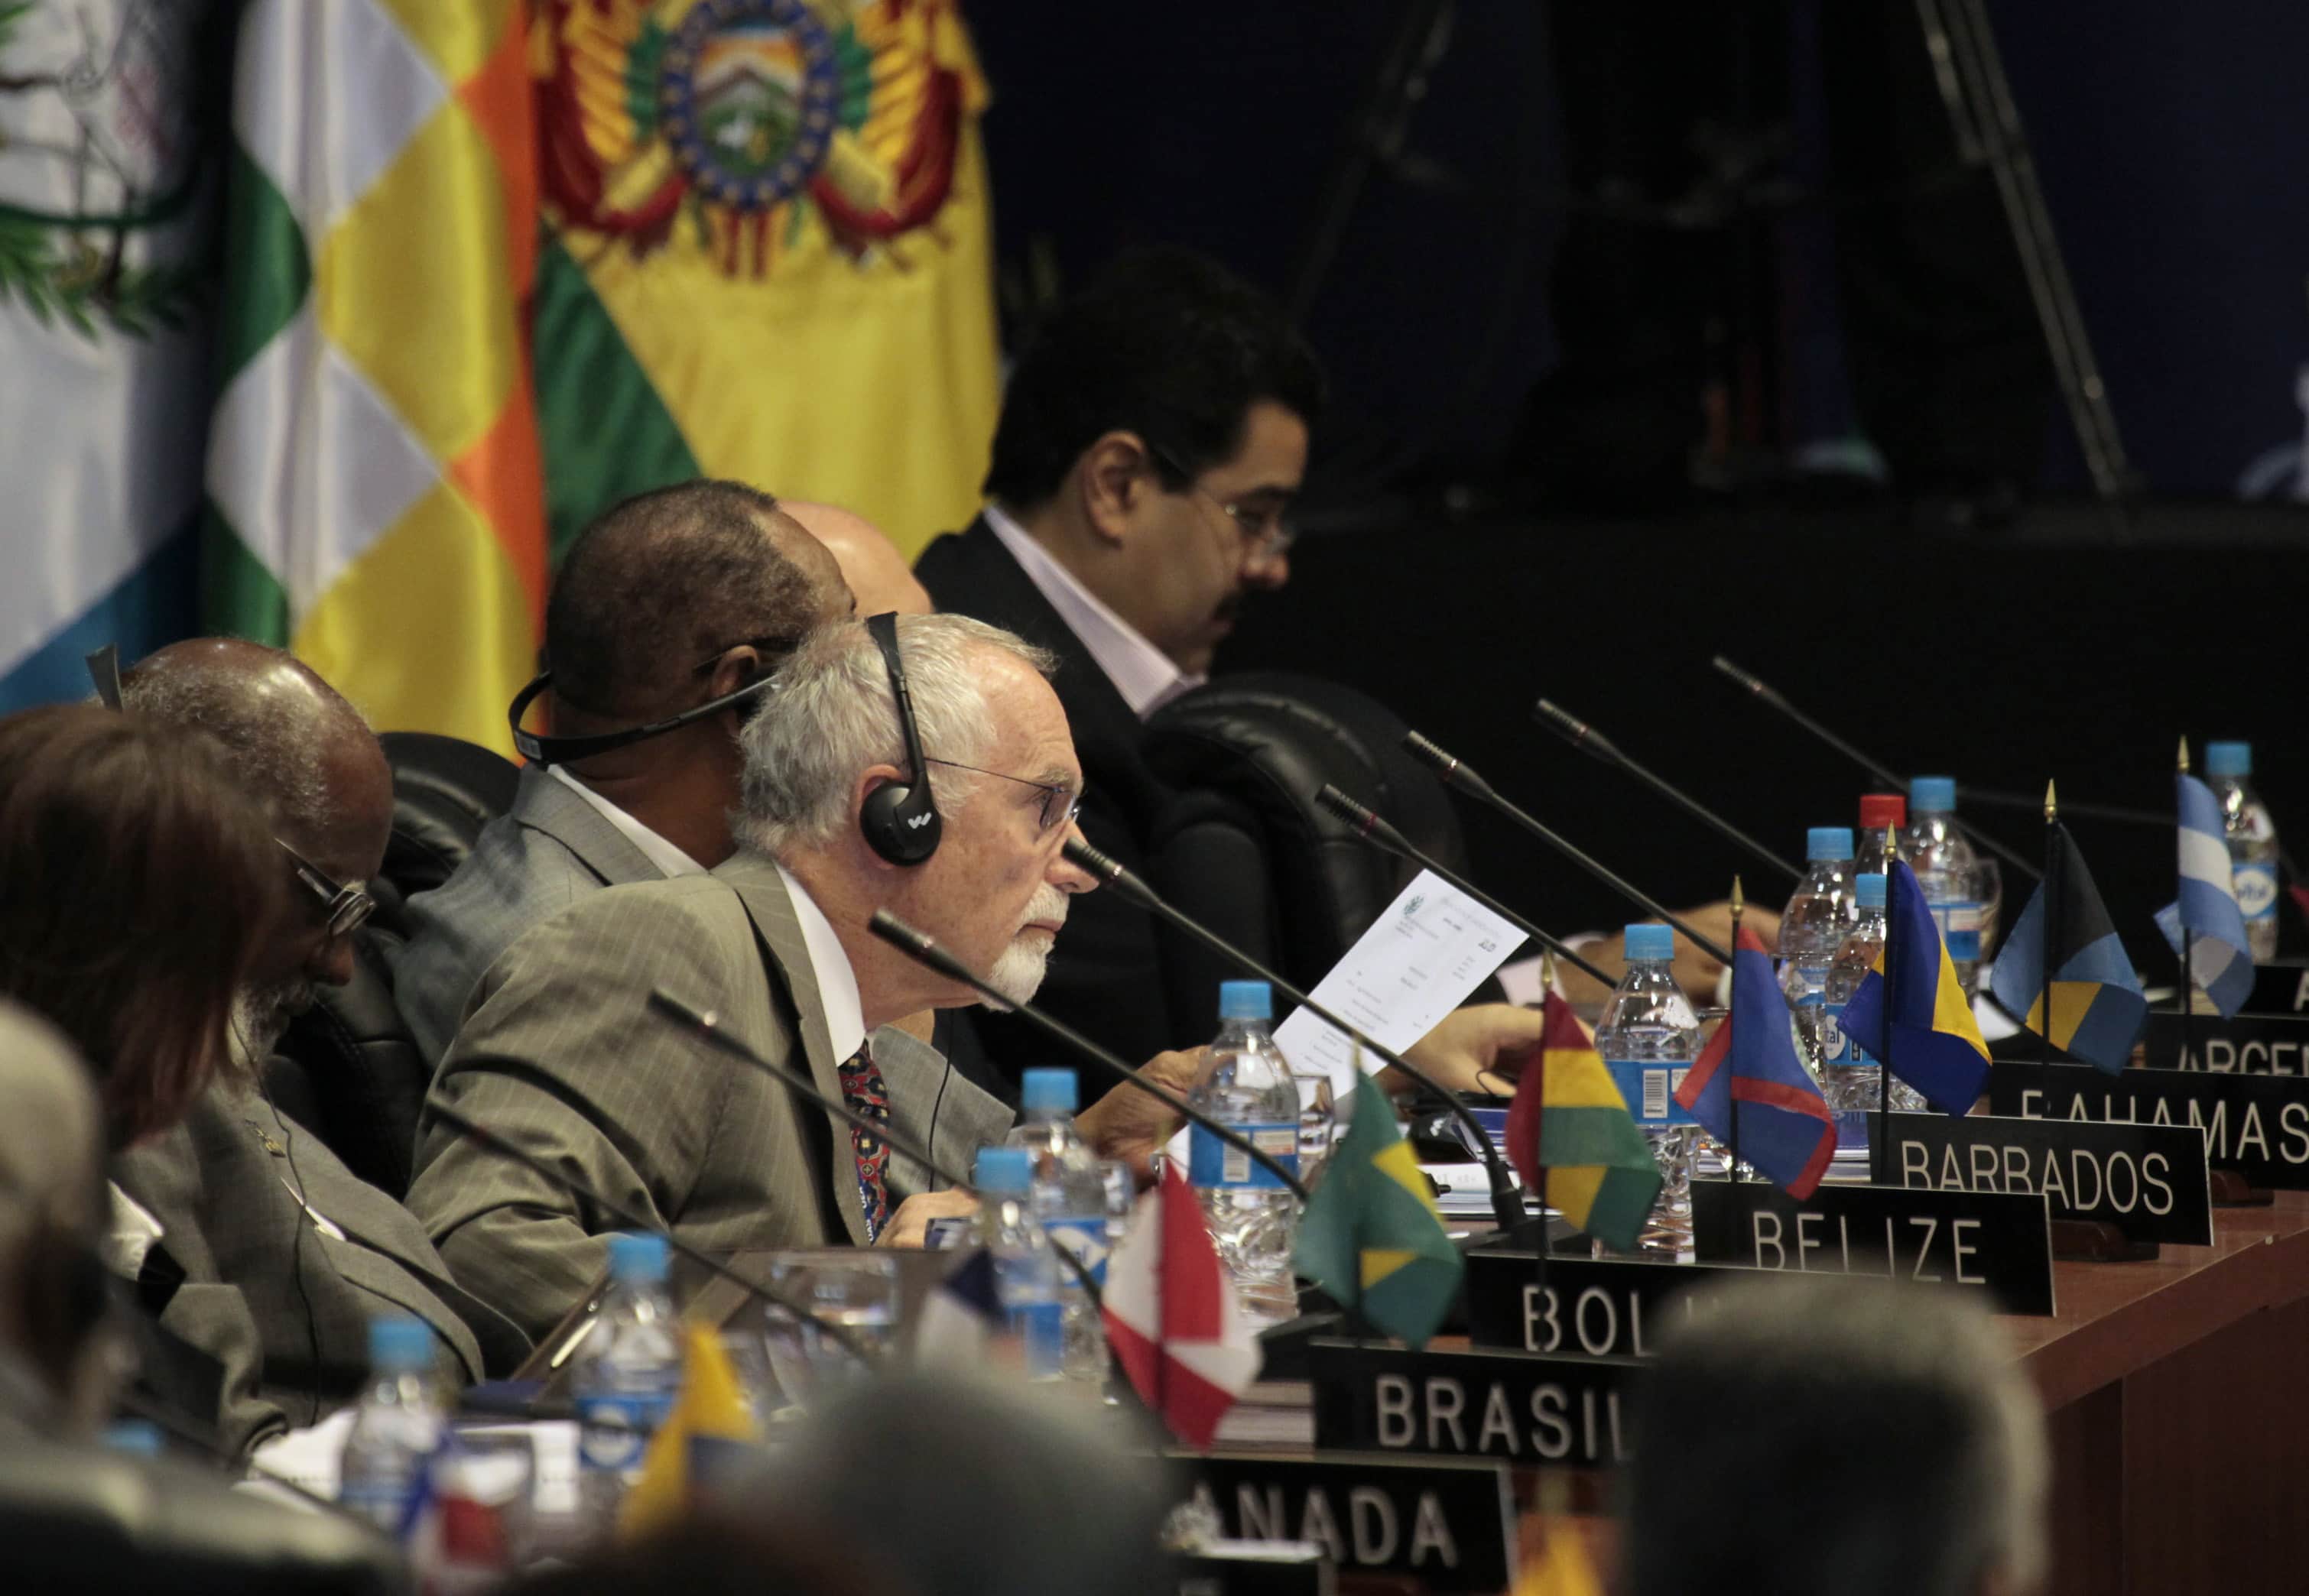 Members of the OAS participate in the OAS 42nd Assembly in June 2012, David Mercado/REUTERS